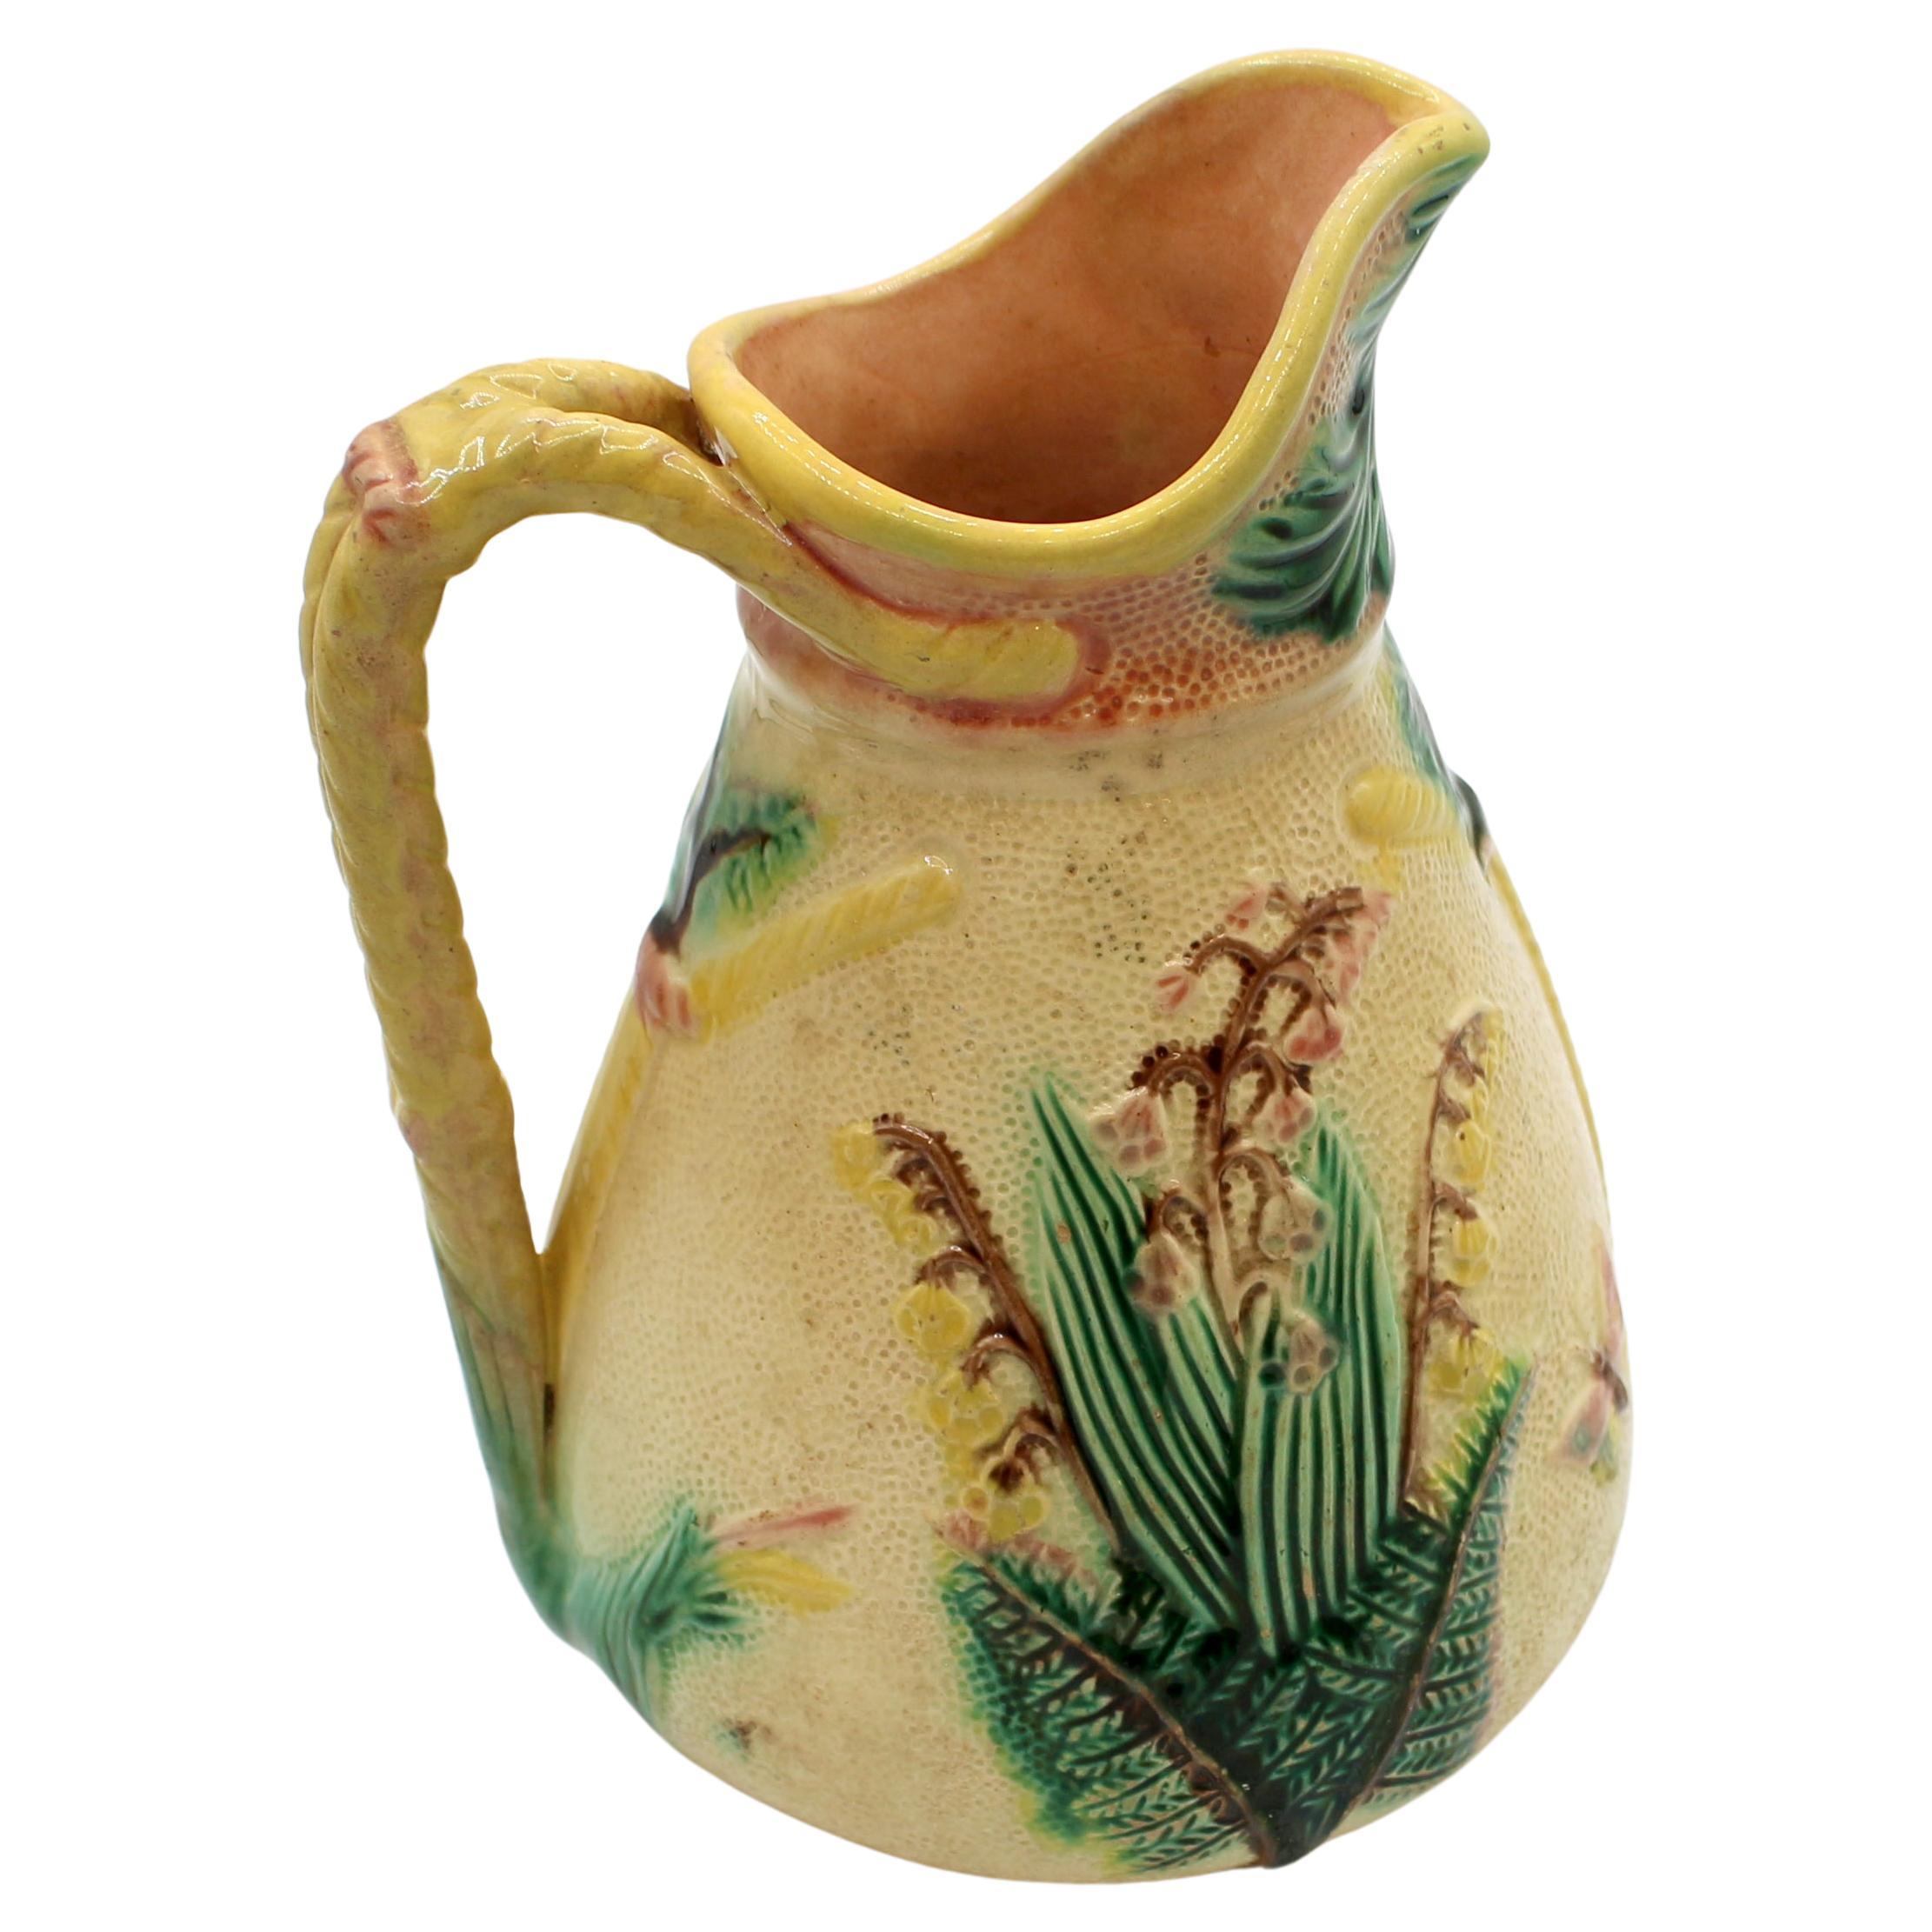 1870s English Majolica Pitcher For Sale